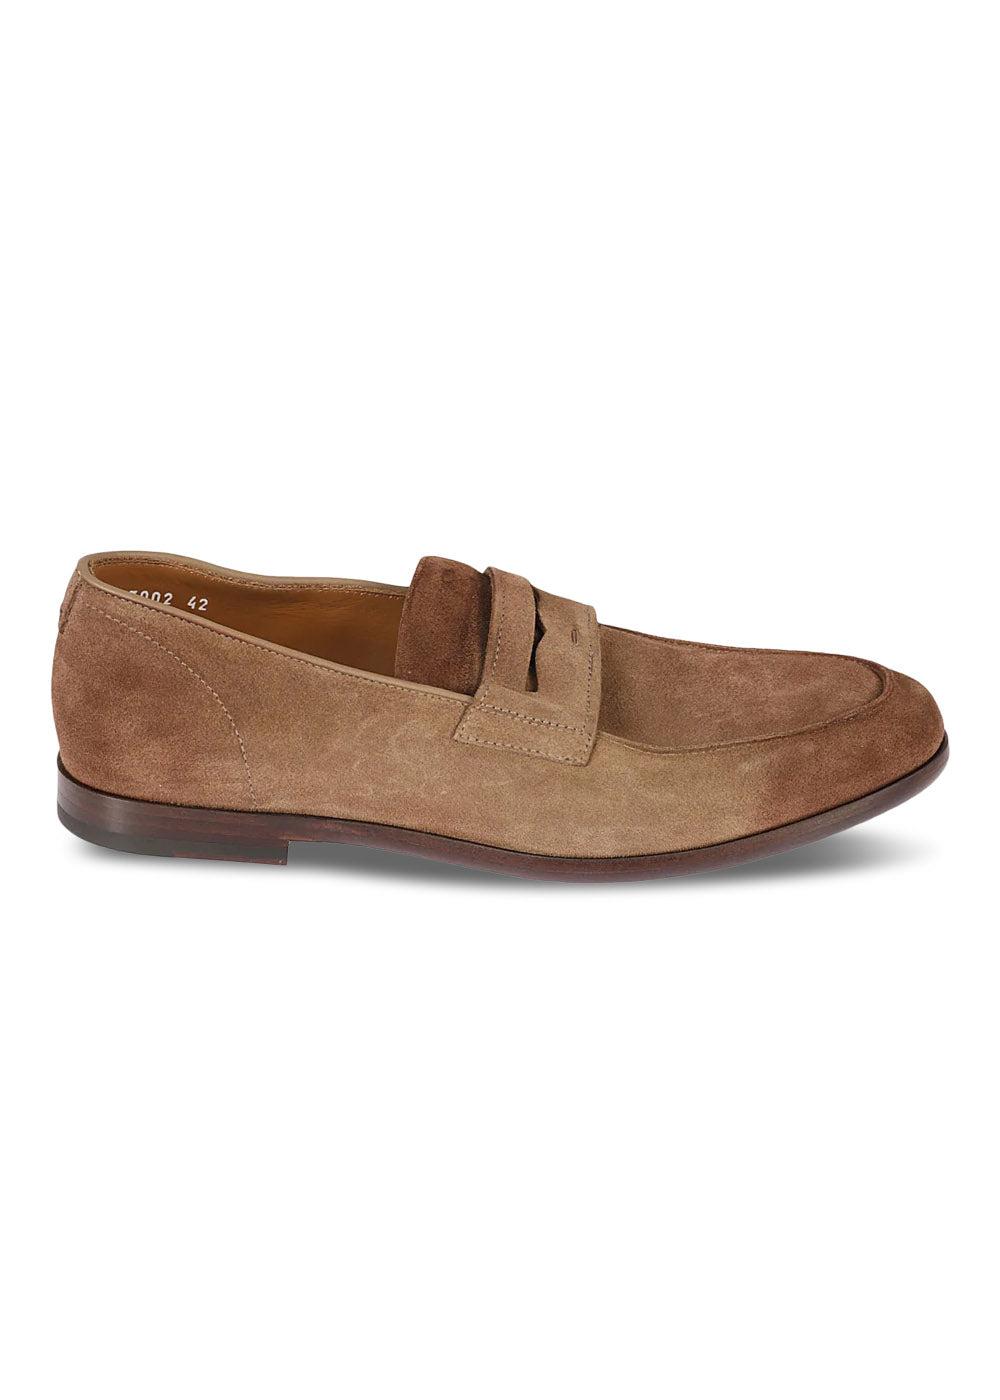 Doucals' MOCASSINO PENNY - Malto Suede. Køb loafers her.